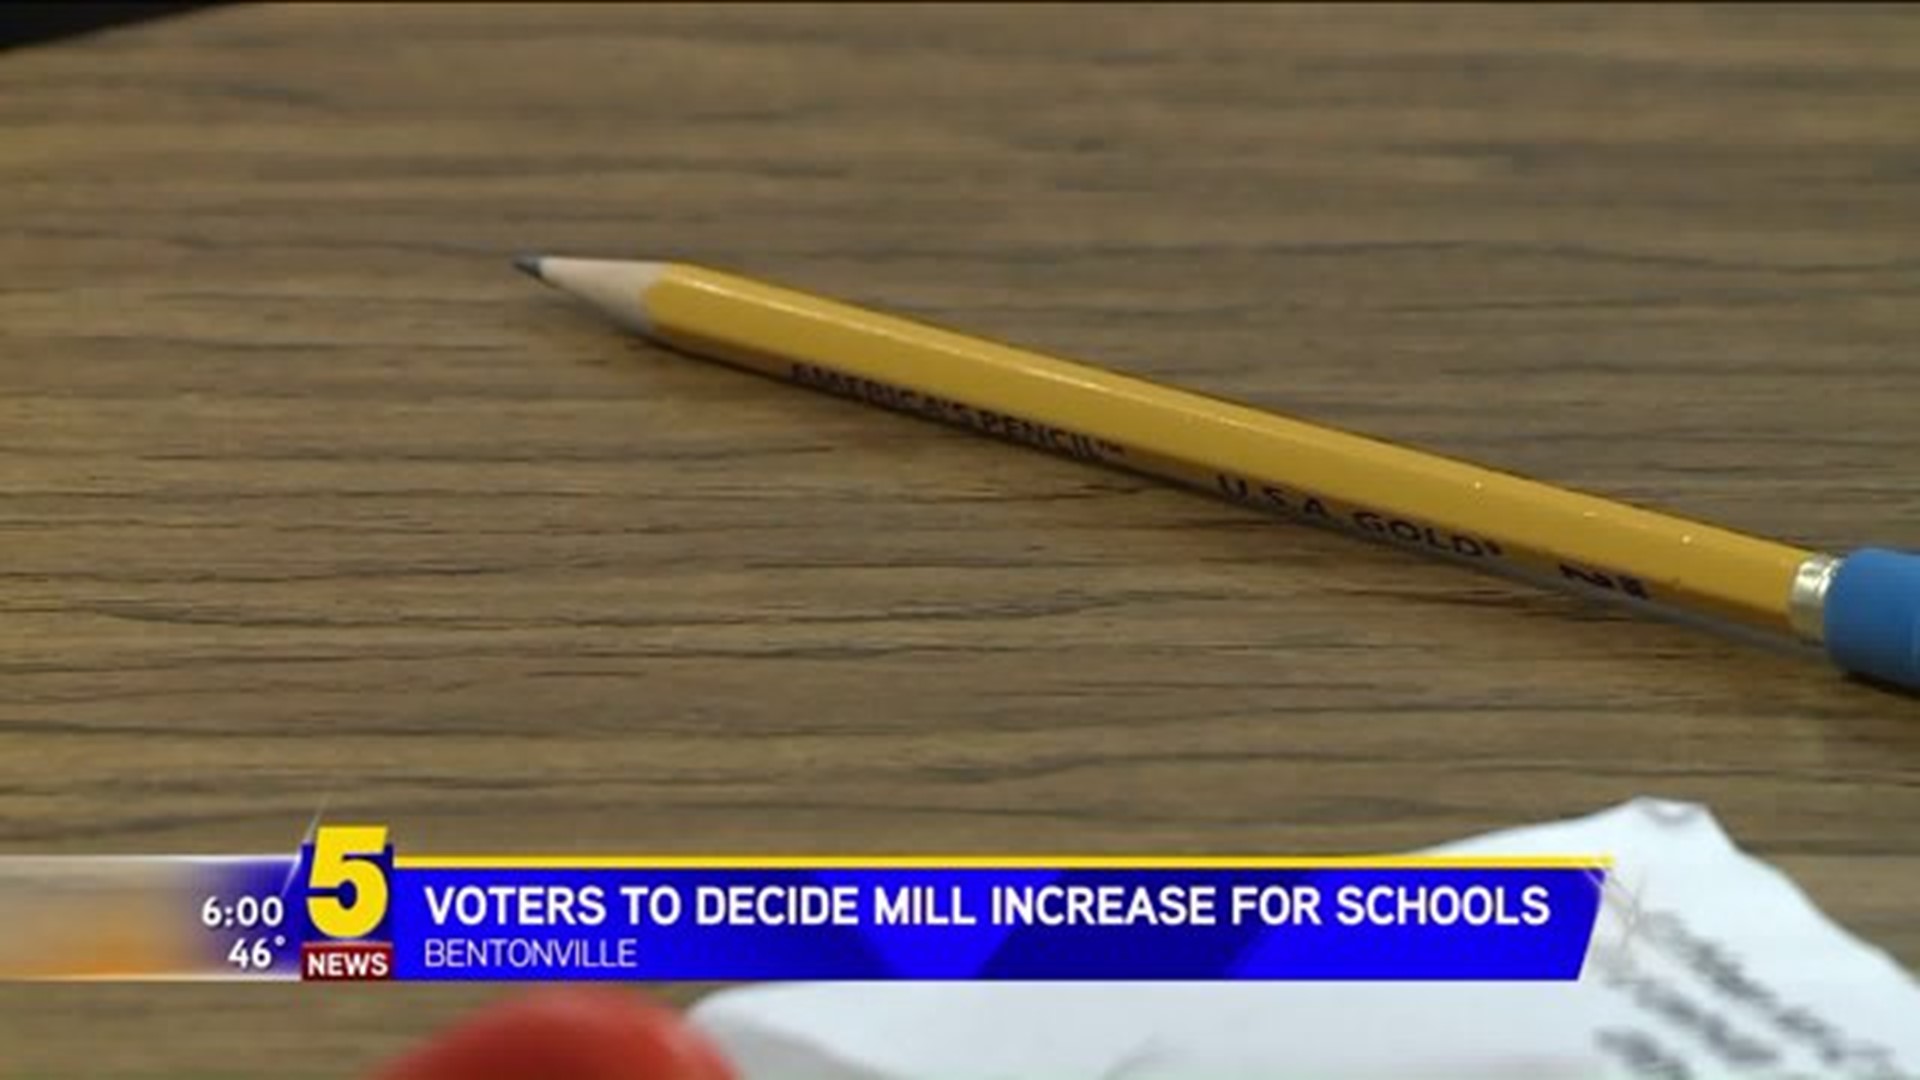 Voters To Decide Mill Increase For New School